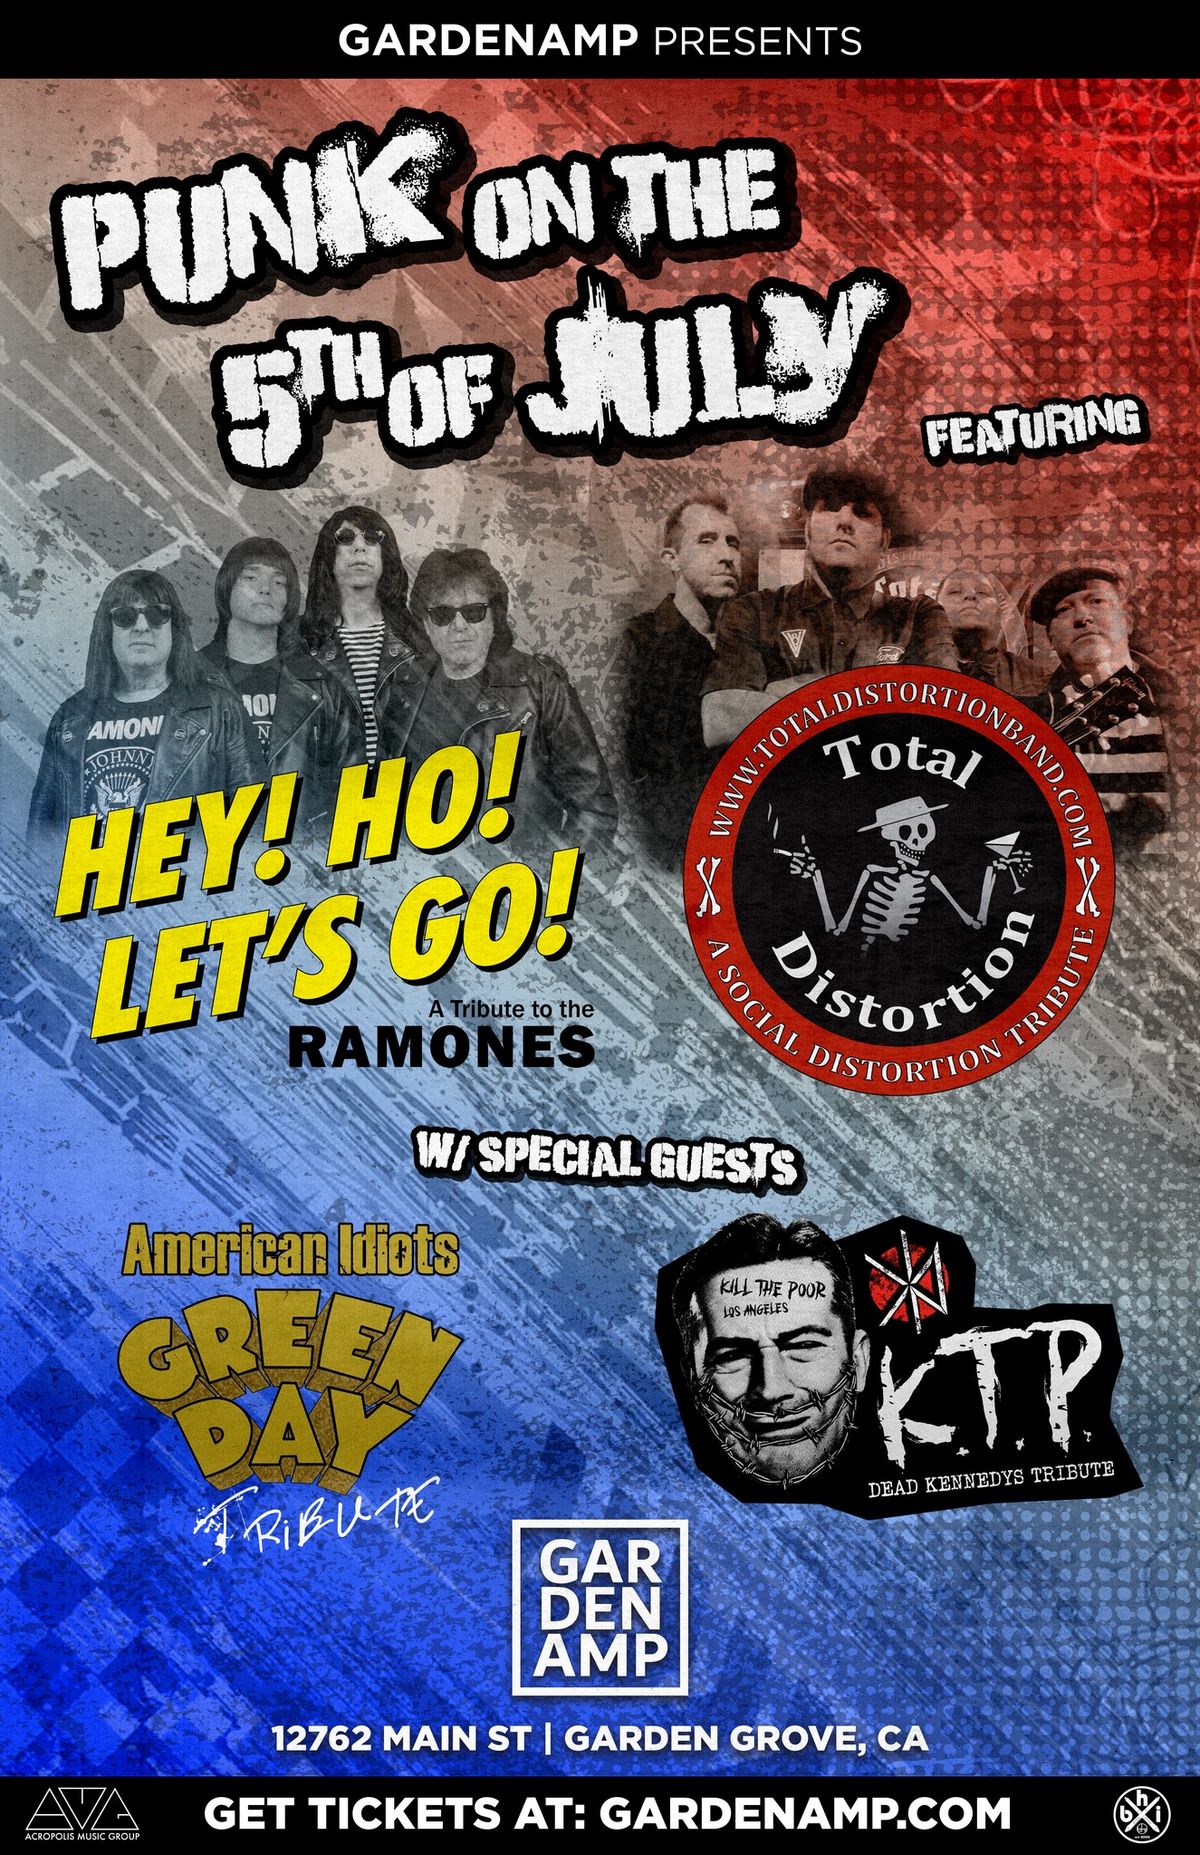 Ramones, Social Distortion, Green Day, Dead Kennedys tributes - Punk on the 5th of July!